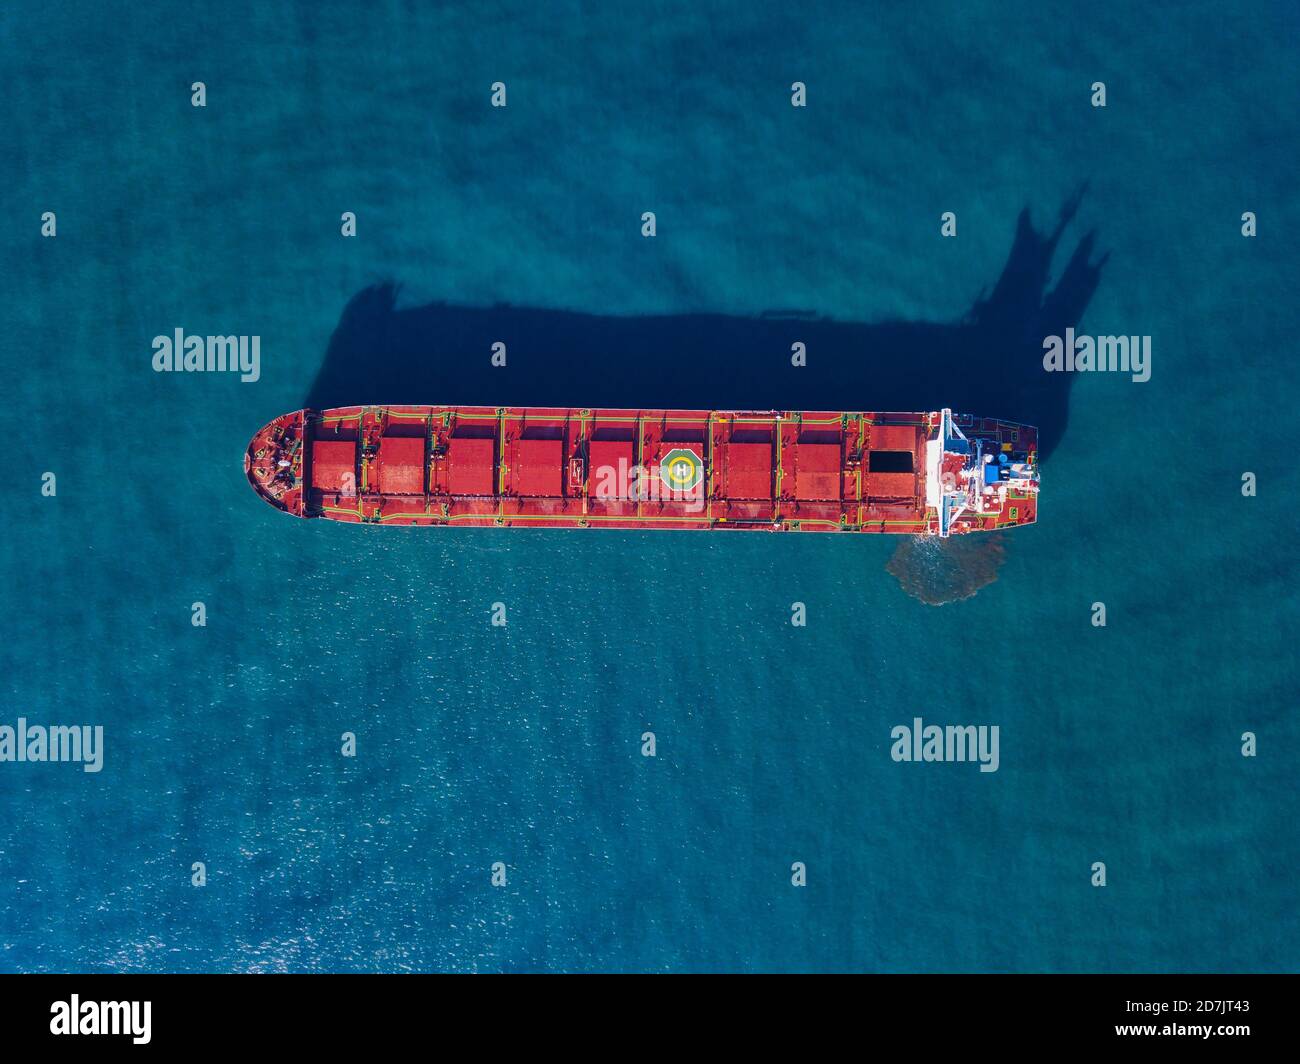 Aerial view of container ship sailing in Sea of Japan Stock Photo